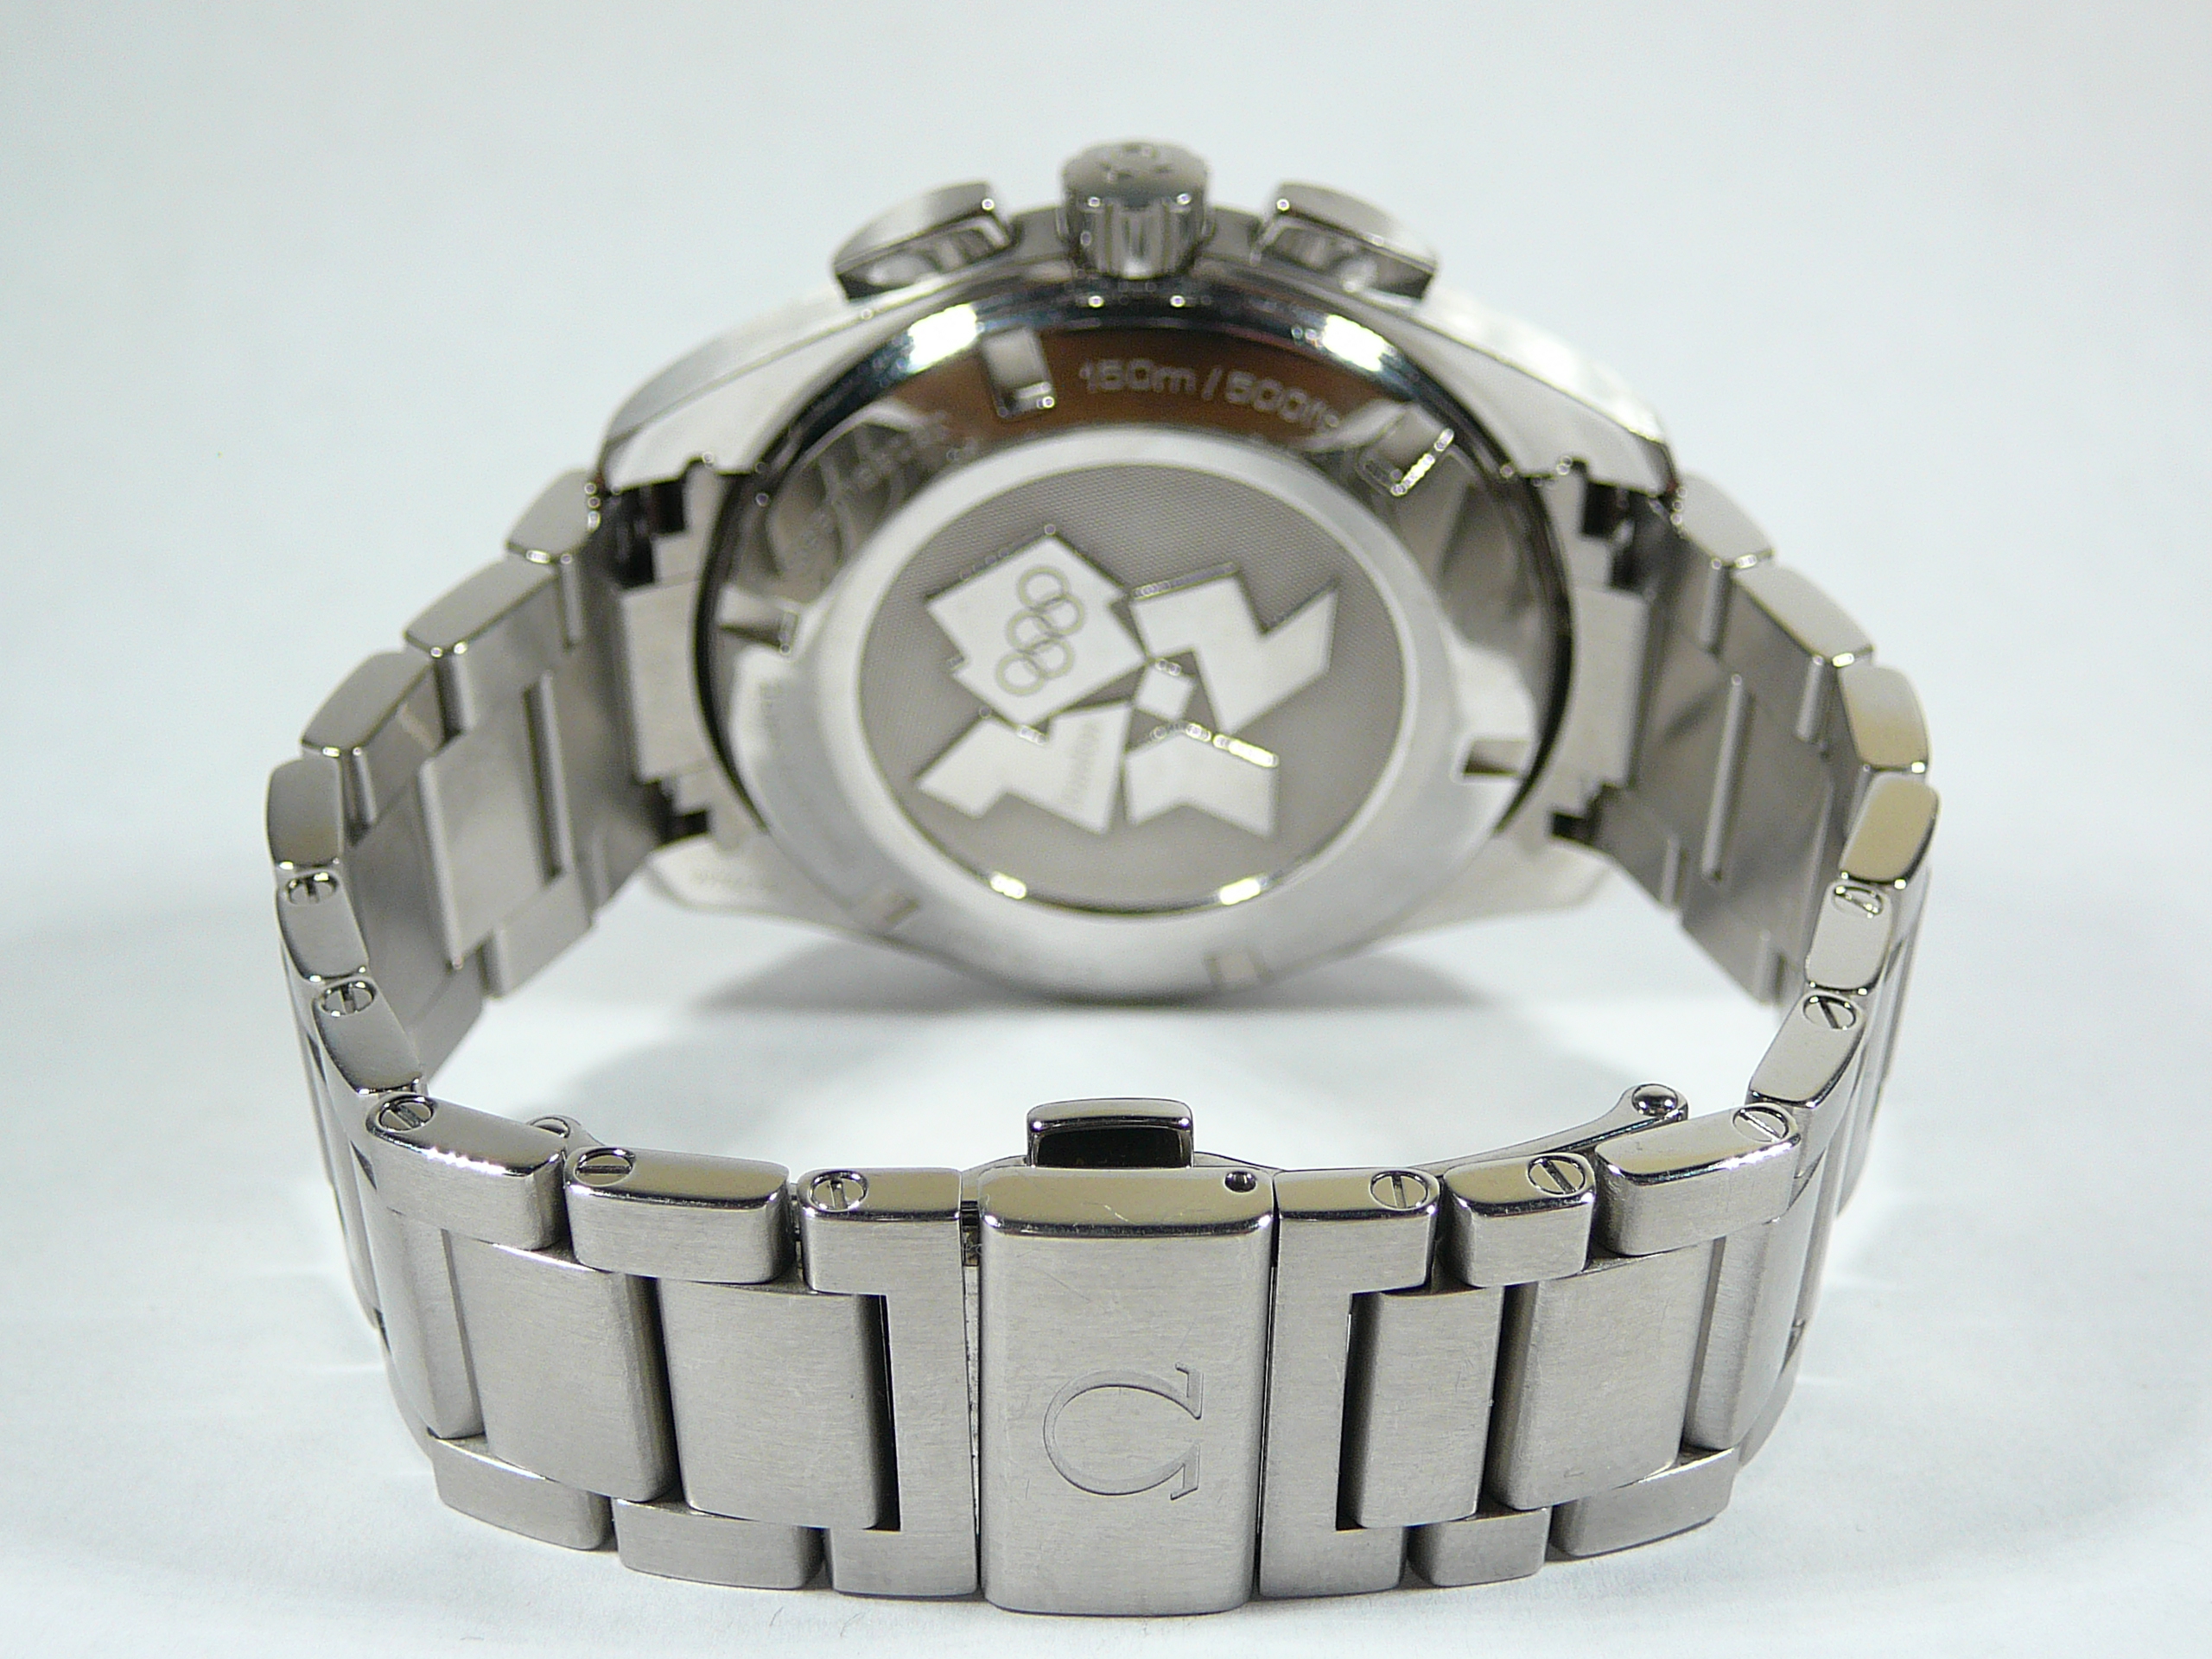 Gents Omega Wrist Watch - Image 3 of 3